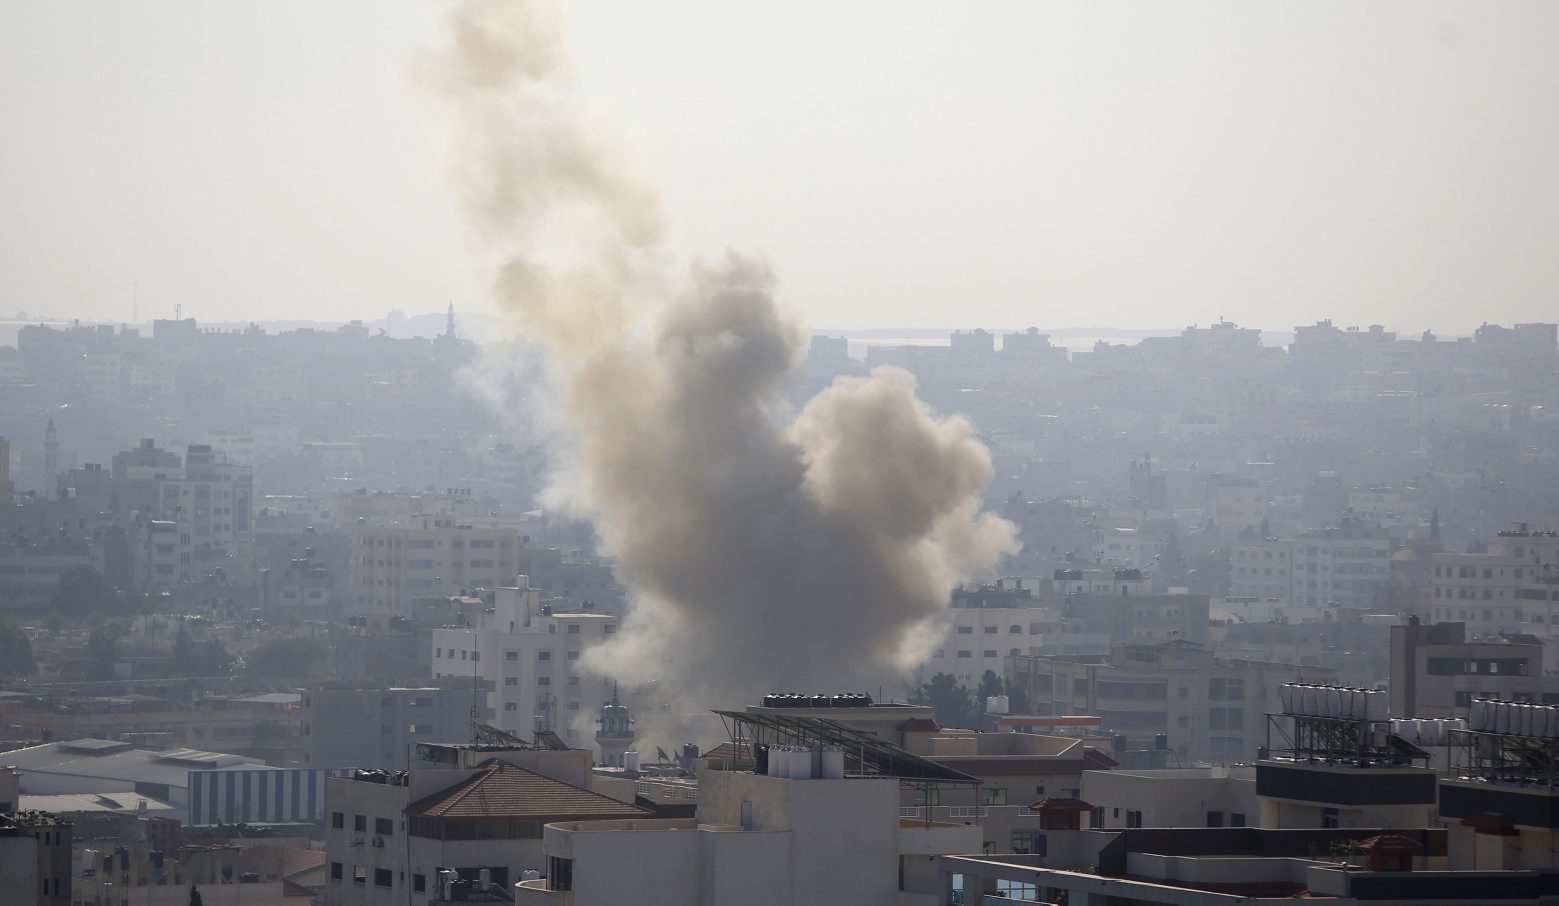 Smoke rises after an Israeli forces strike in Gaza City, Tuesday, Nov. 12, 2019. Israel killed a senior Islamic Jihad commander in Gaza early Tuesday in a resumption of pinpointed targeting that threatens a fierce round of cross-border violence with Palestinian militants. (AP Photo/Hatem Moussa) Israel Palestinians